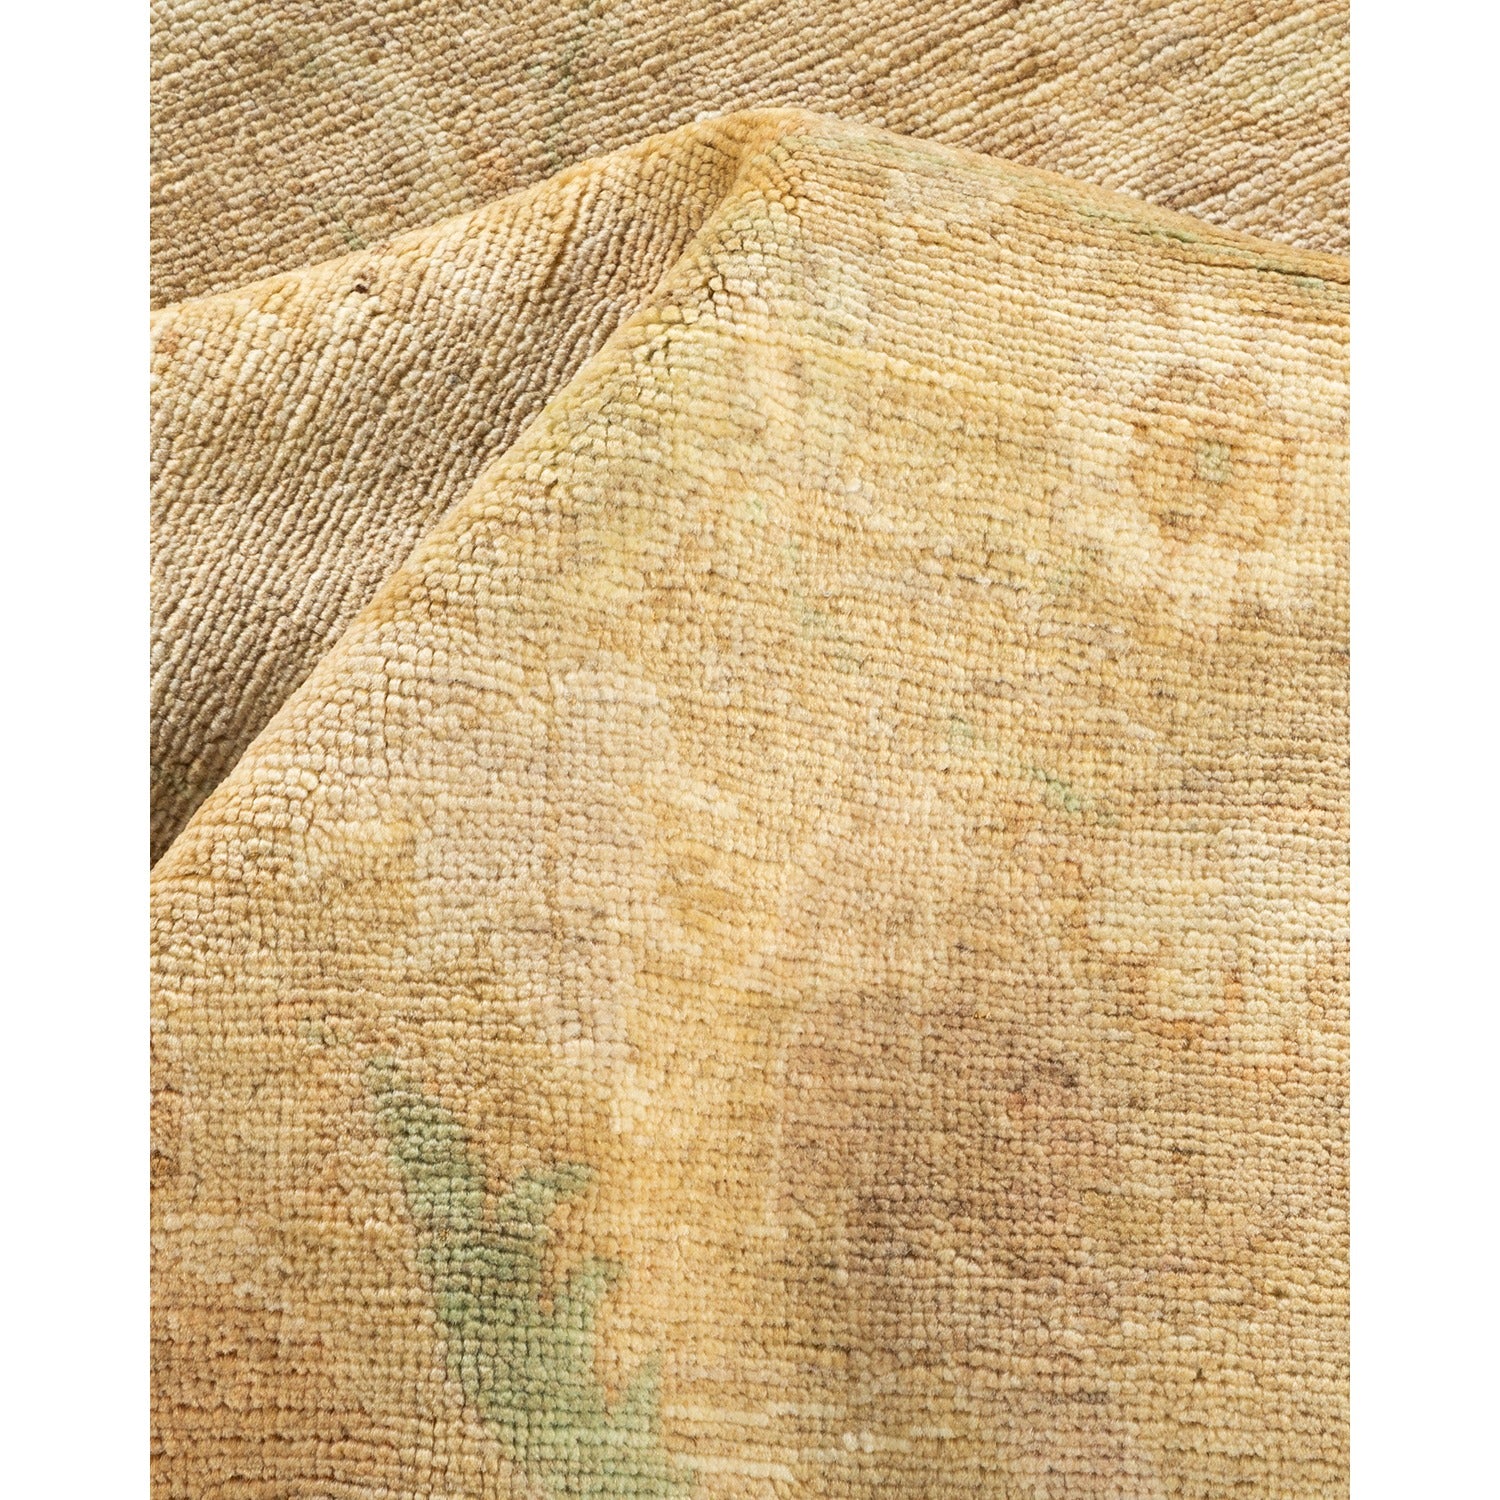 Close-up view of textured fabric with woven pattern in varied tones.